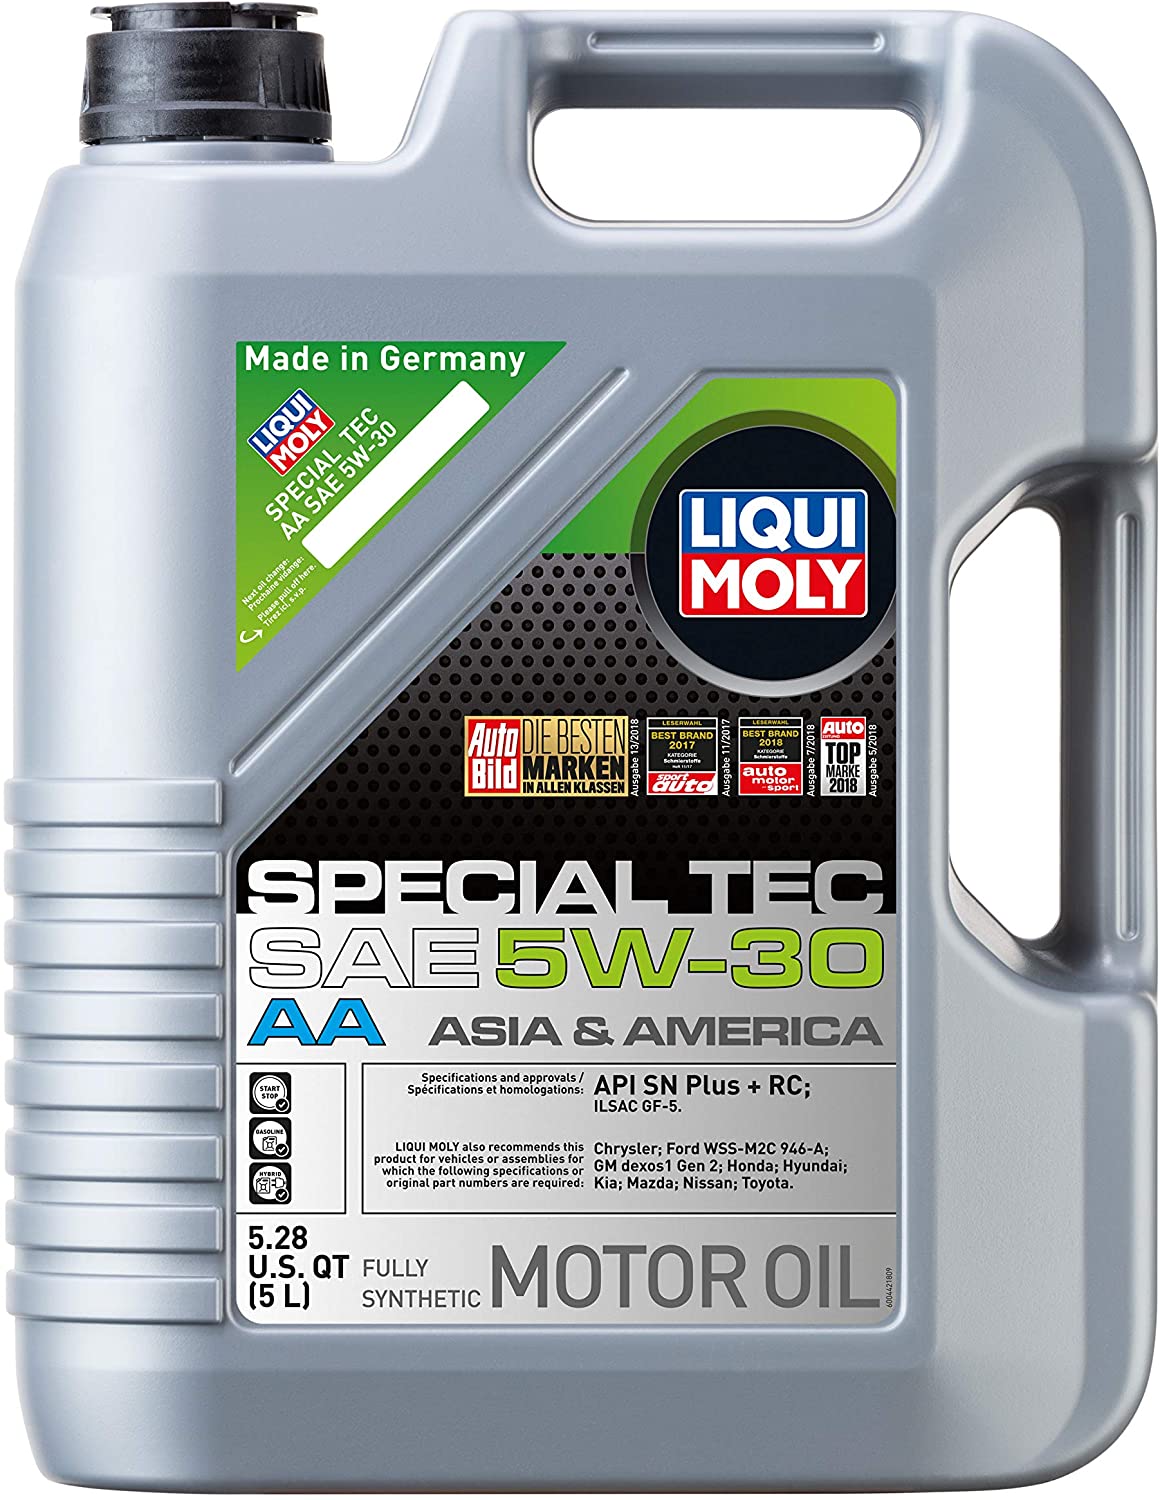 Liqui Moly 5w30 Engine Oil, Can of 3.5 Litre at best price in Bengaluru